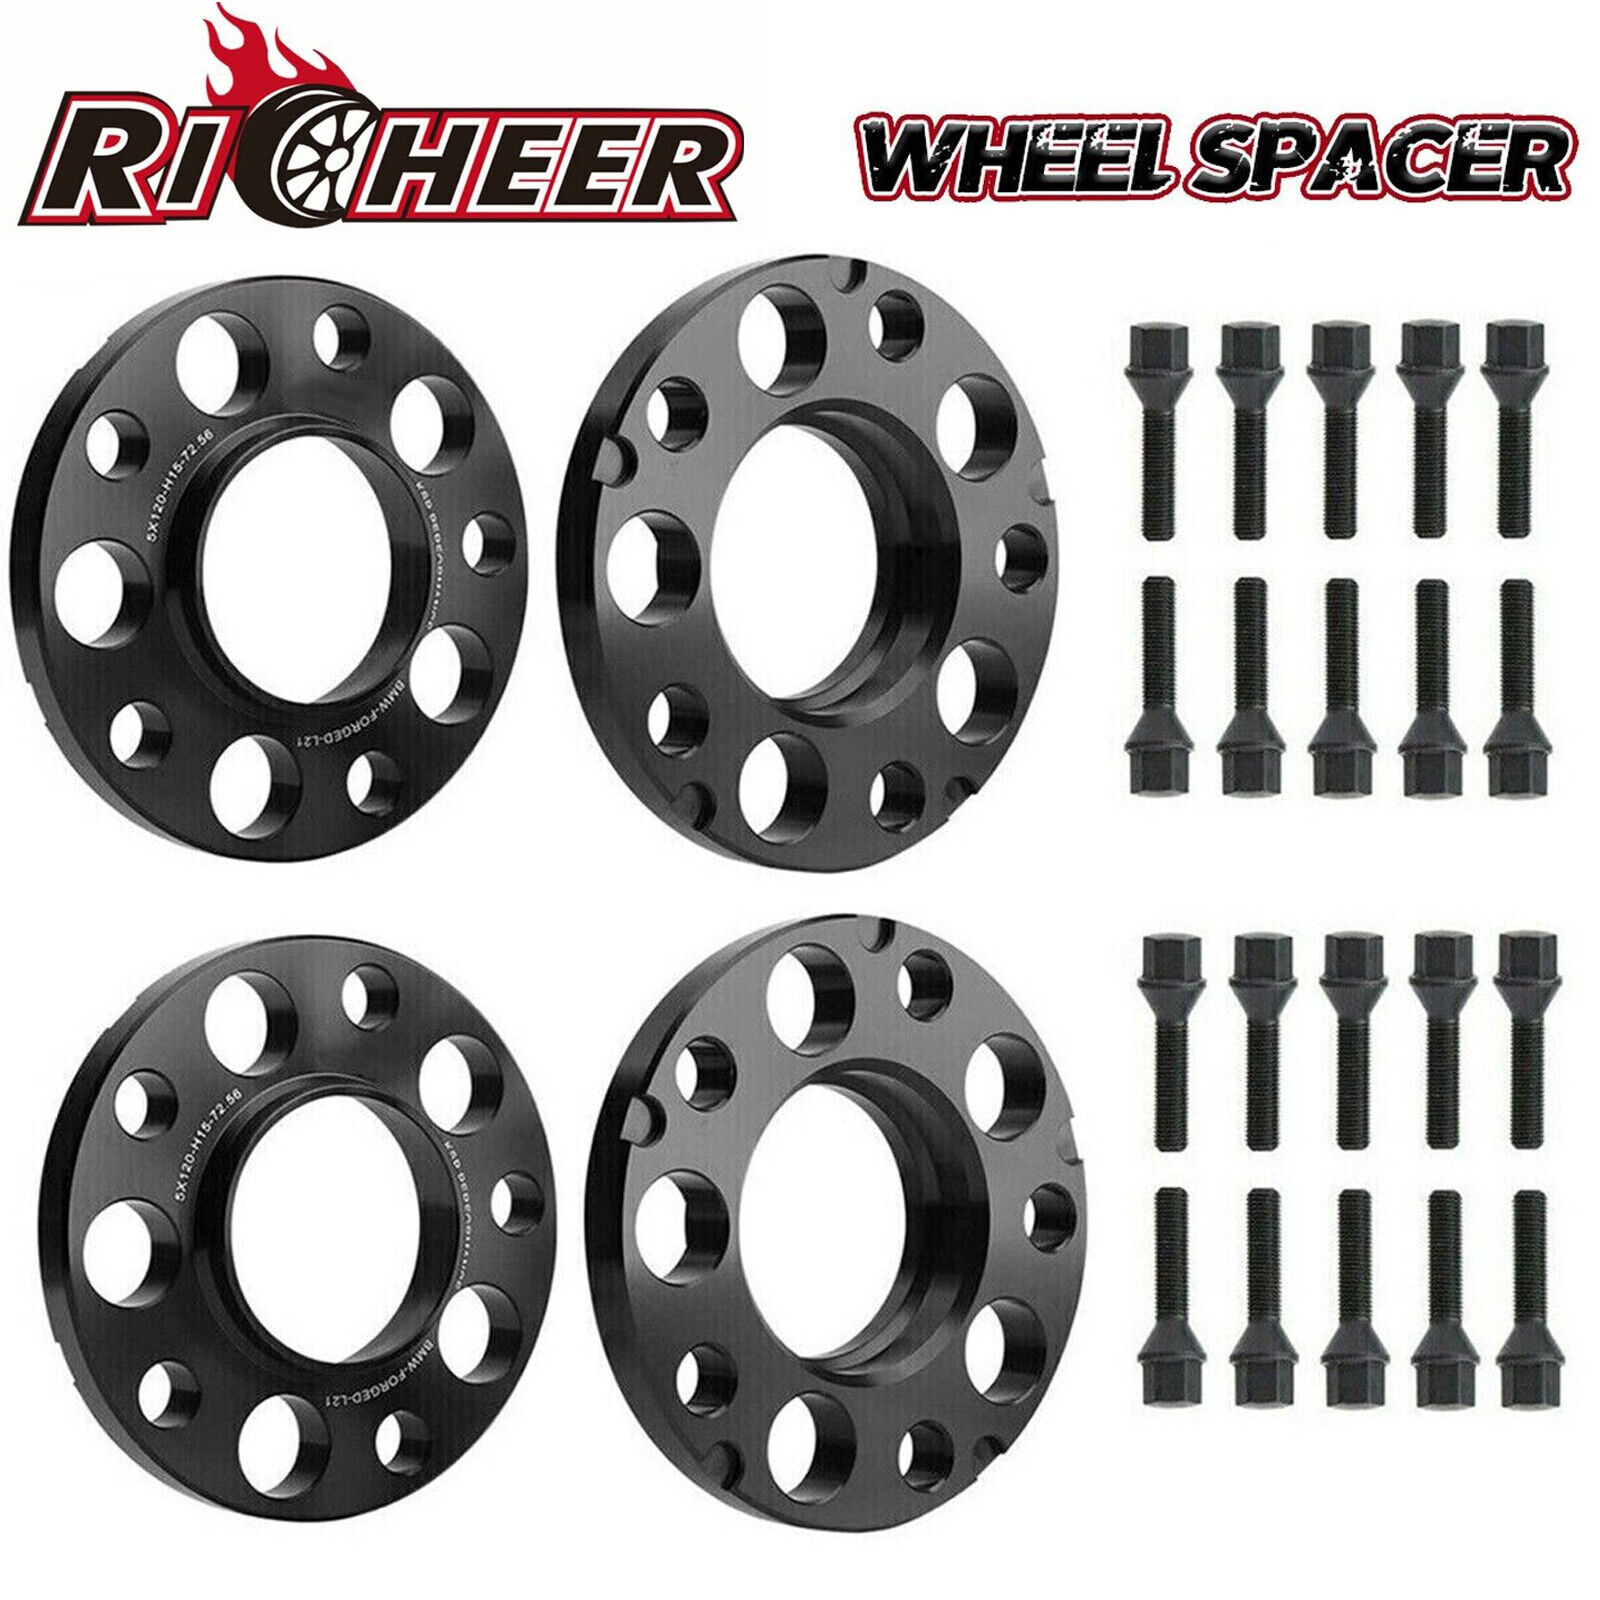 15mm 5x120 Wheel Spacers HubCentric For BMW F Series F30 F32 F33 F80 F10 M3 M4